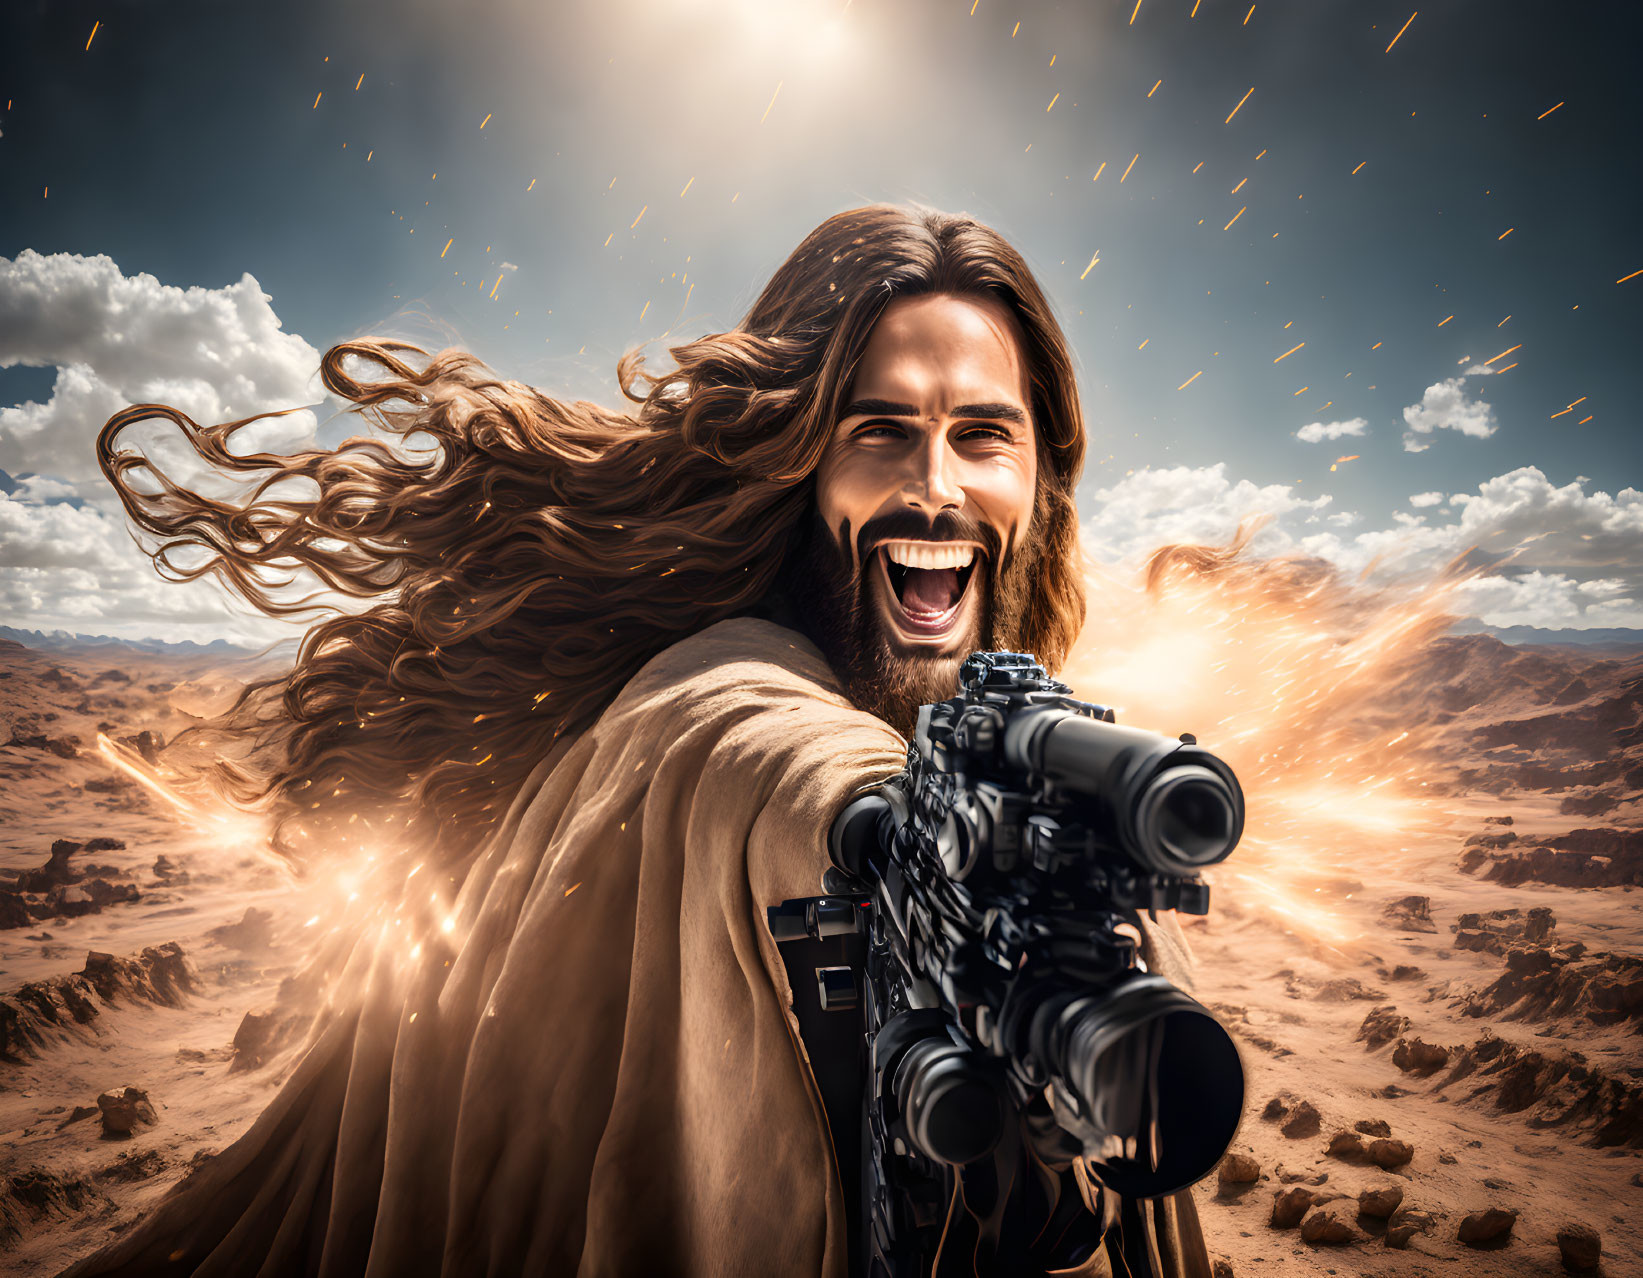 Bearded person with long hair holding camera in desert scenery